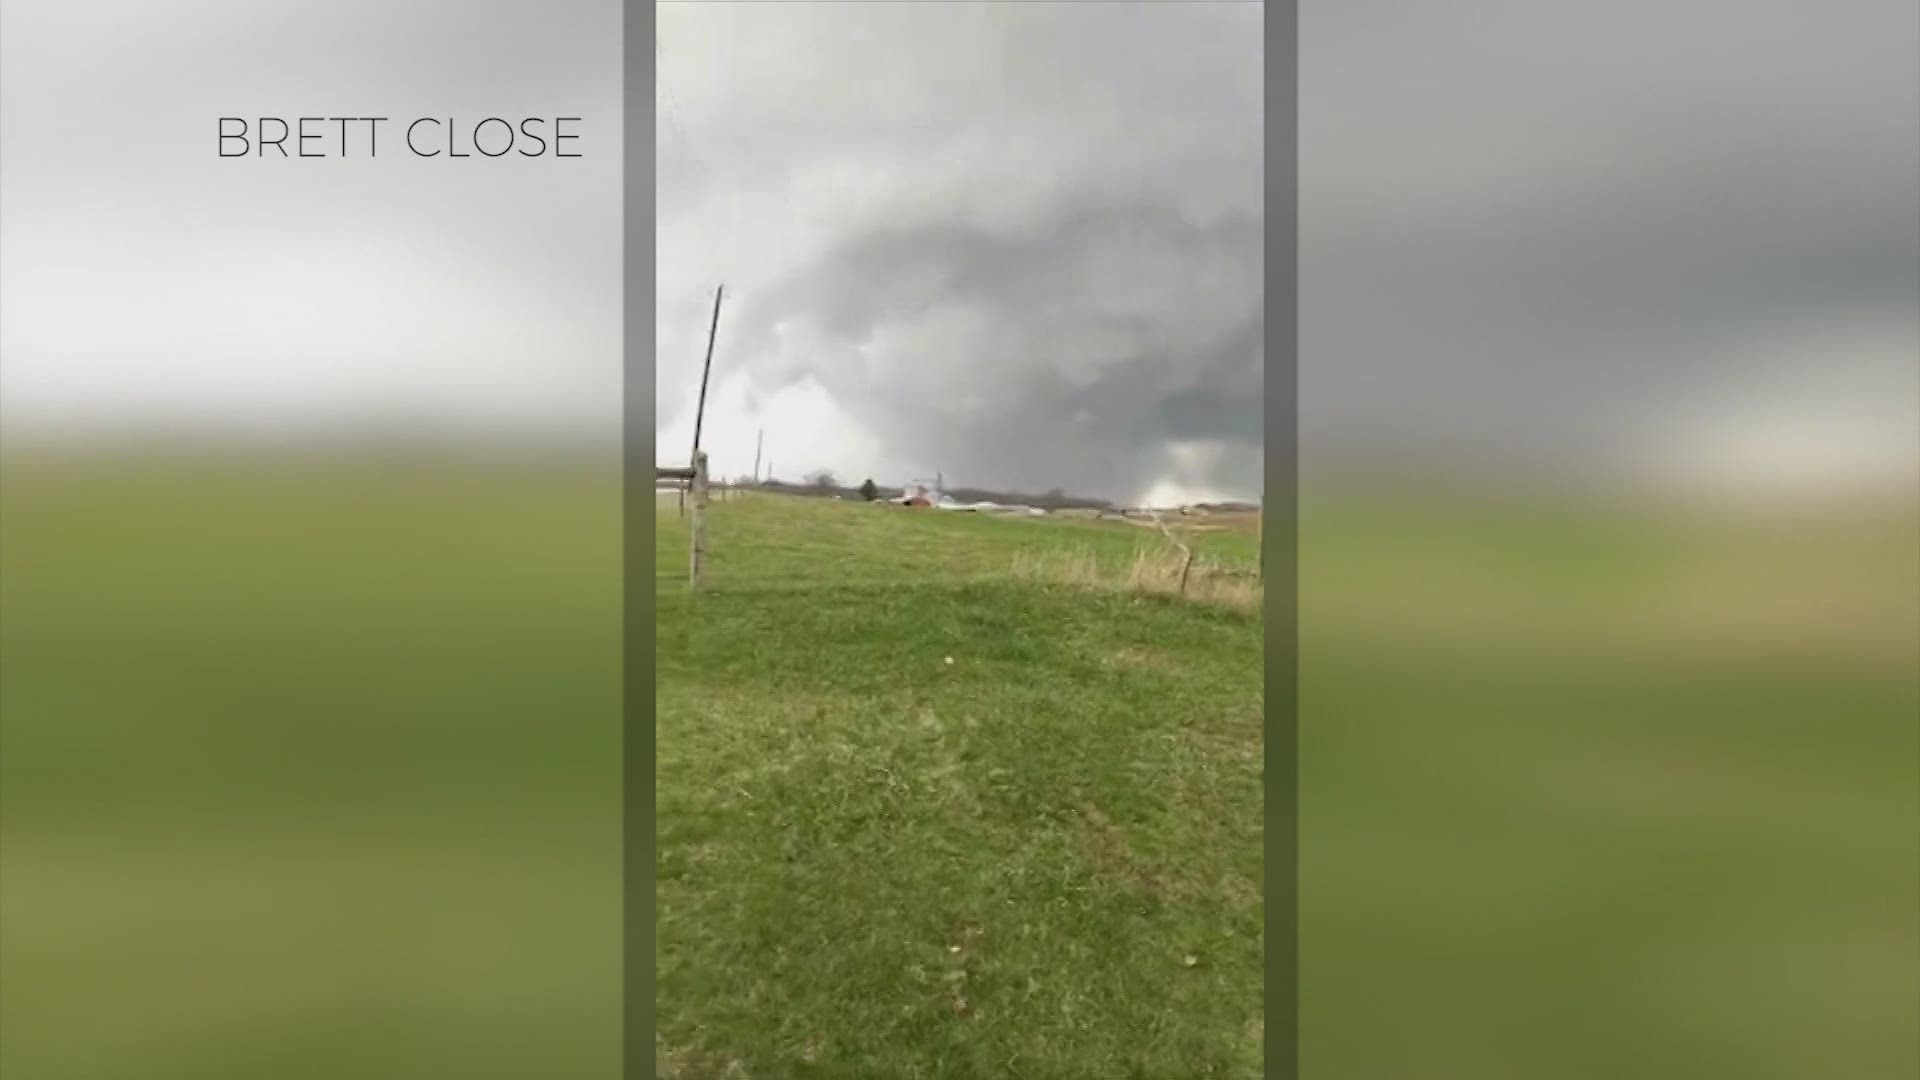 April 14, 2019: This incredible footage of Sunday's tornado in Shelby, Ohio, was captured on Facebook live by Brett Close.